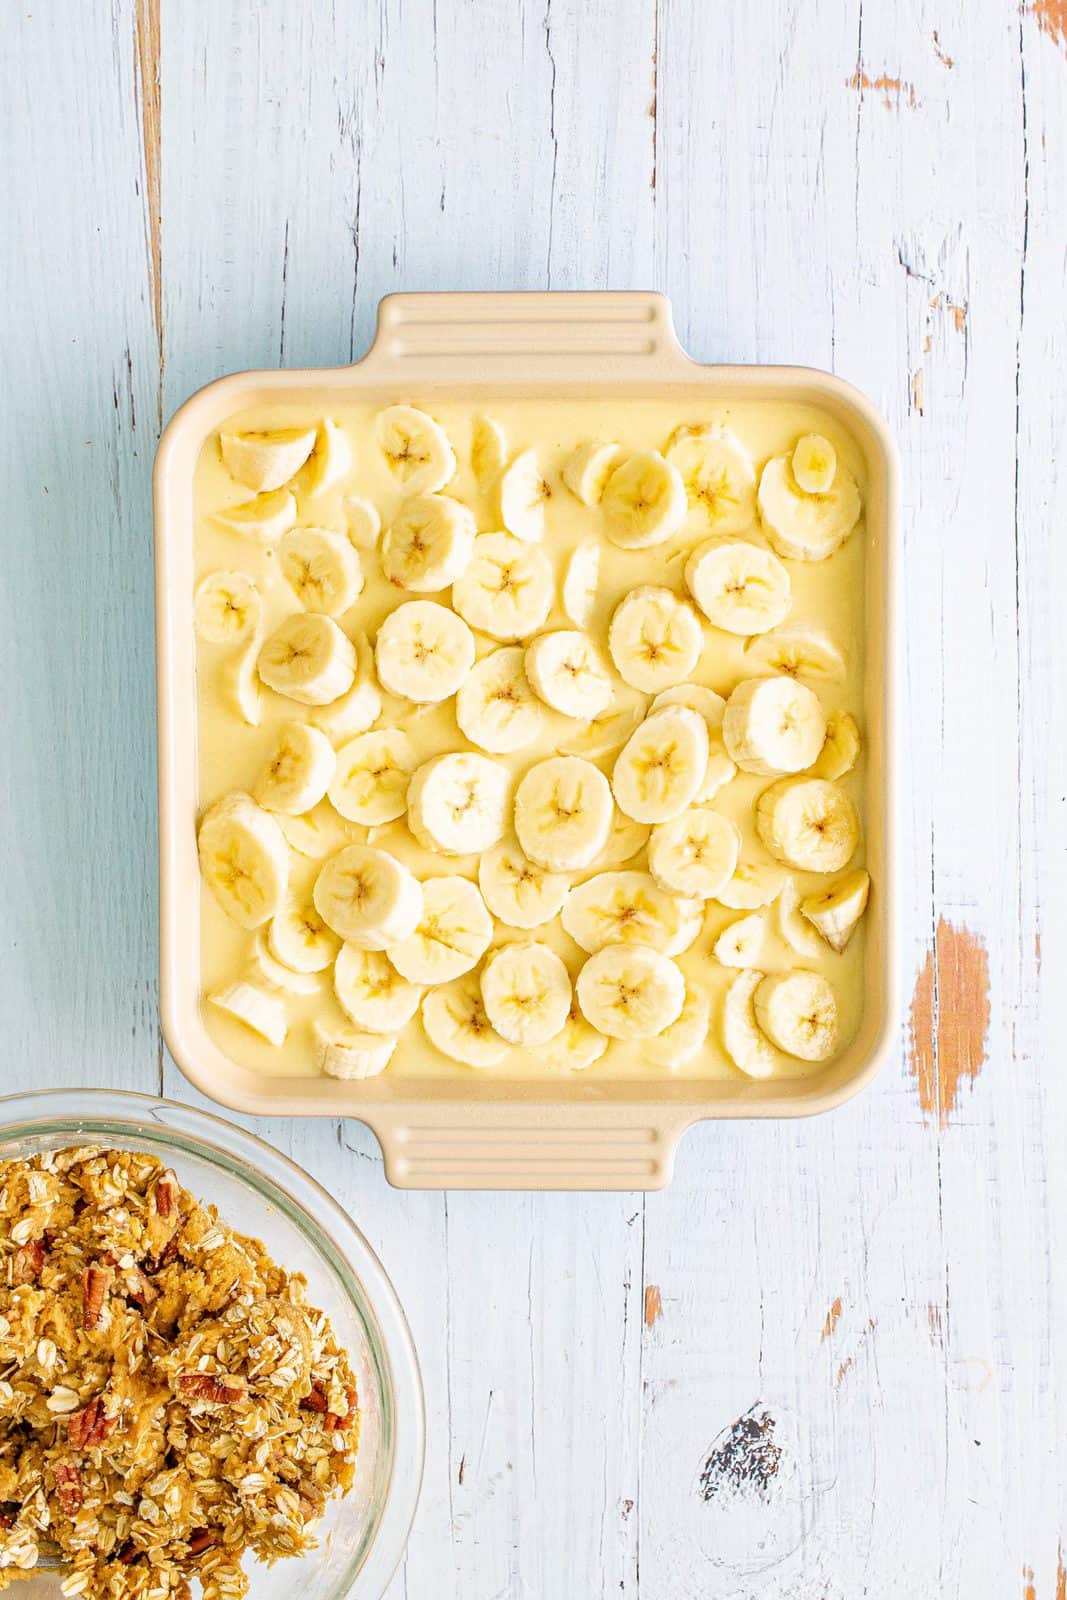 sliced bananas layered on top of batter in a square pan